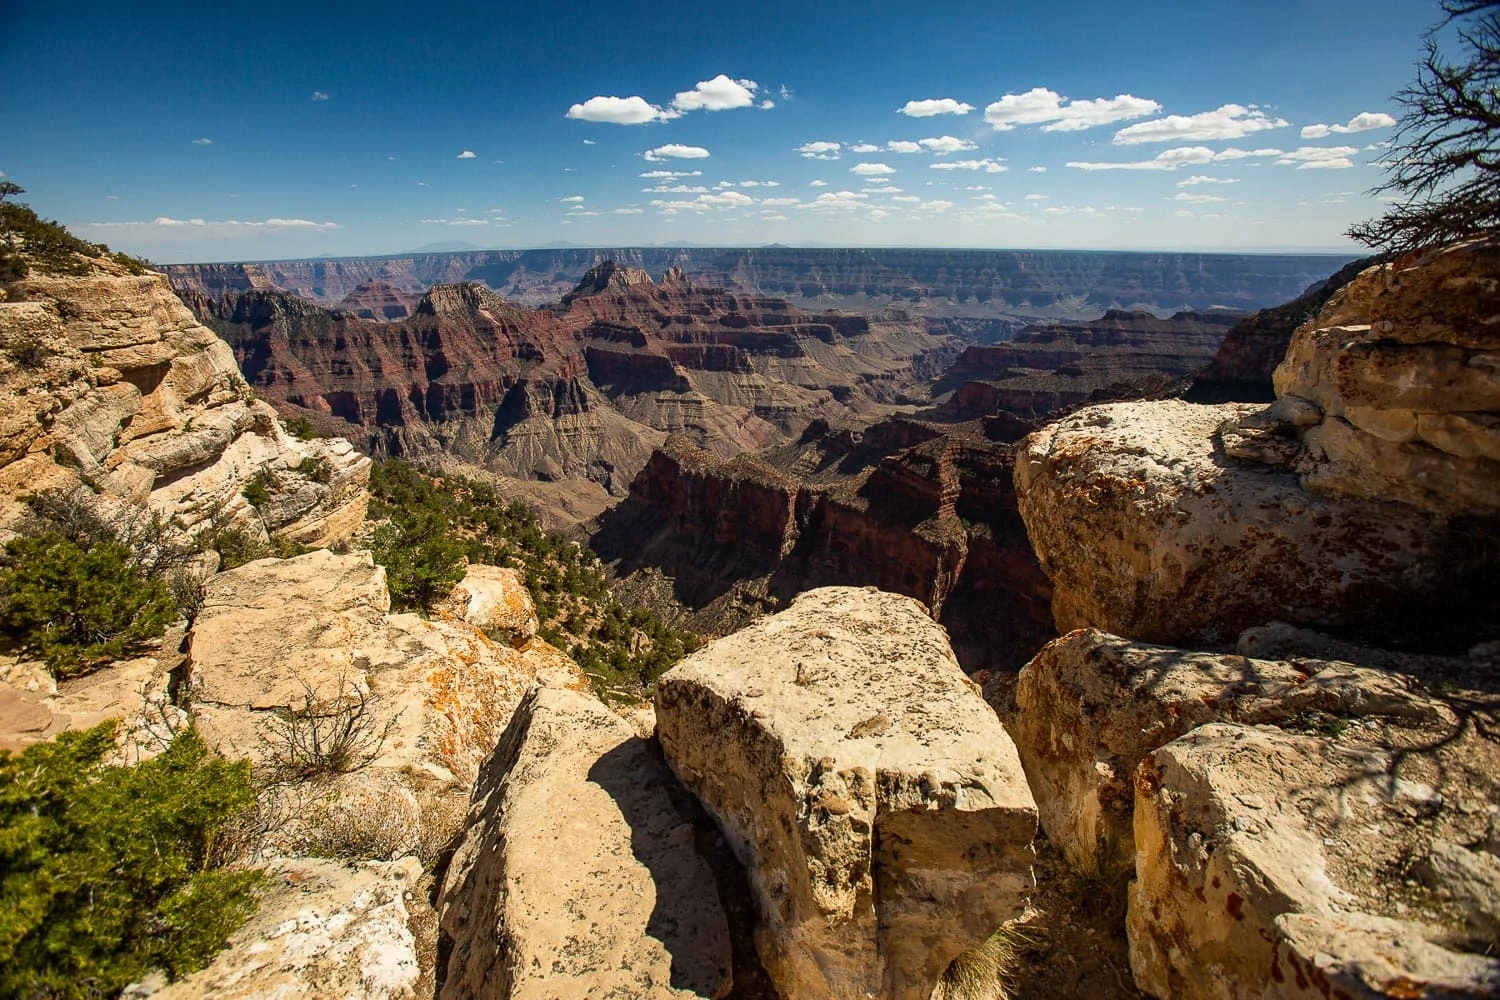 The south rim of the grand canyon in early summer with blue sky and yellow rocks framing the overlook.